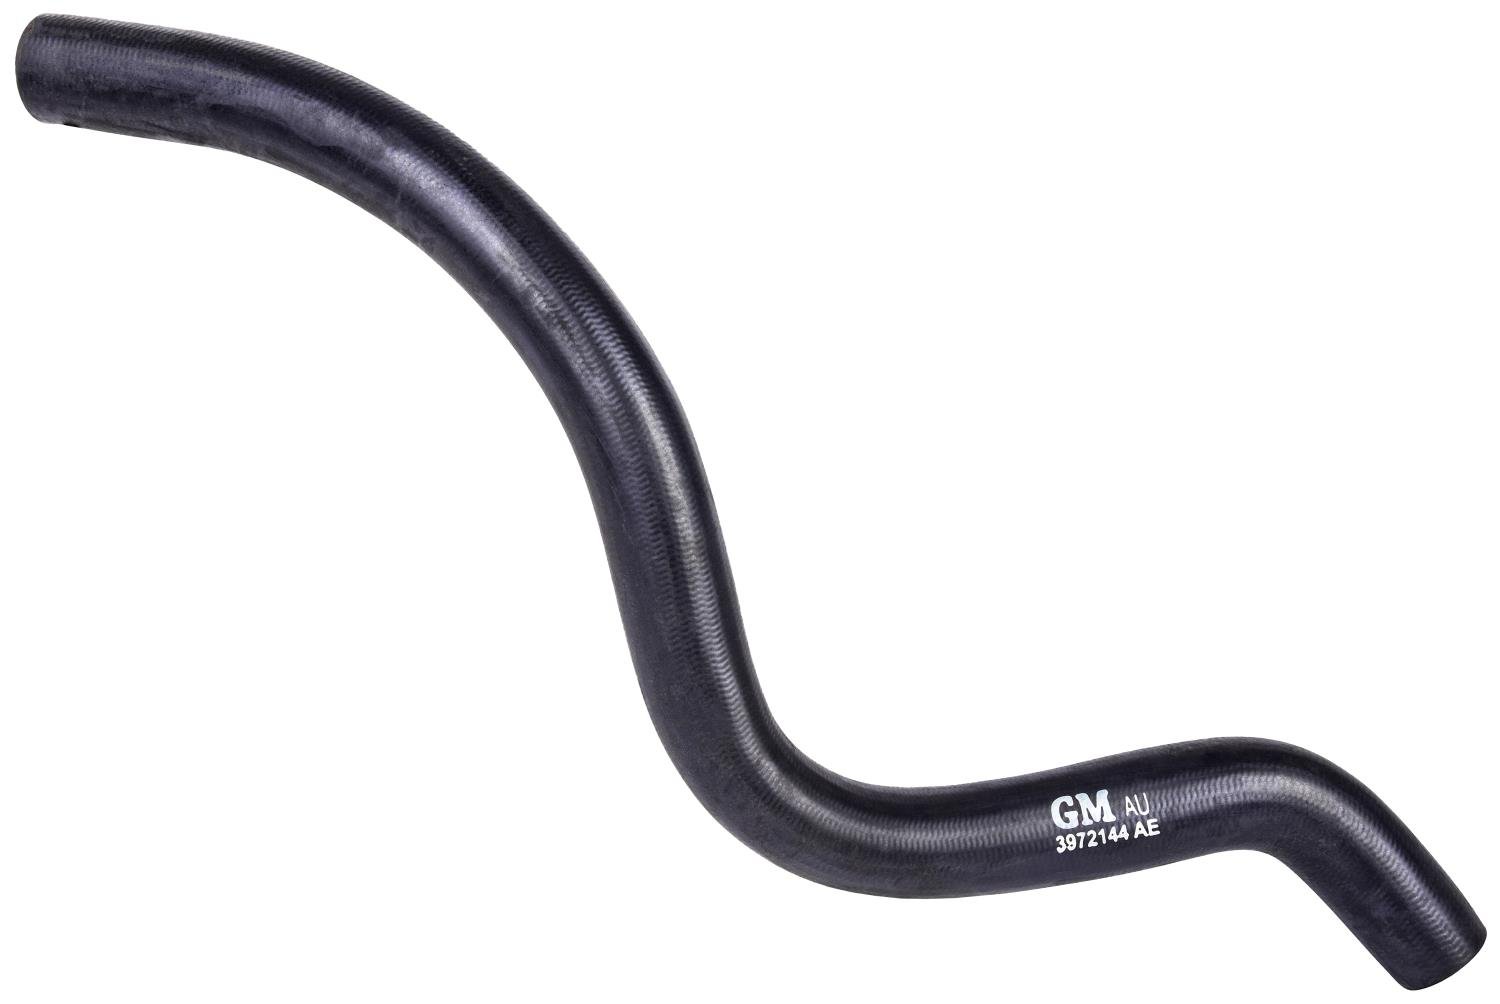 Upper Radiator Hose for 1970-1972 Chevrolet Monte Carlo [Direct-Fit Replacement for GM 3972144]